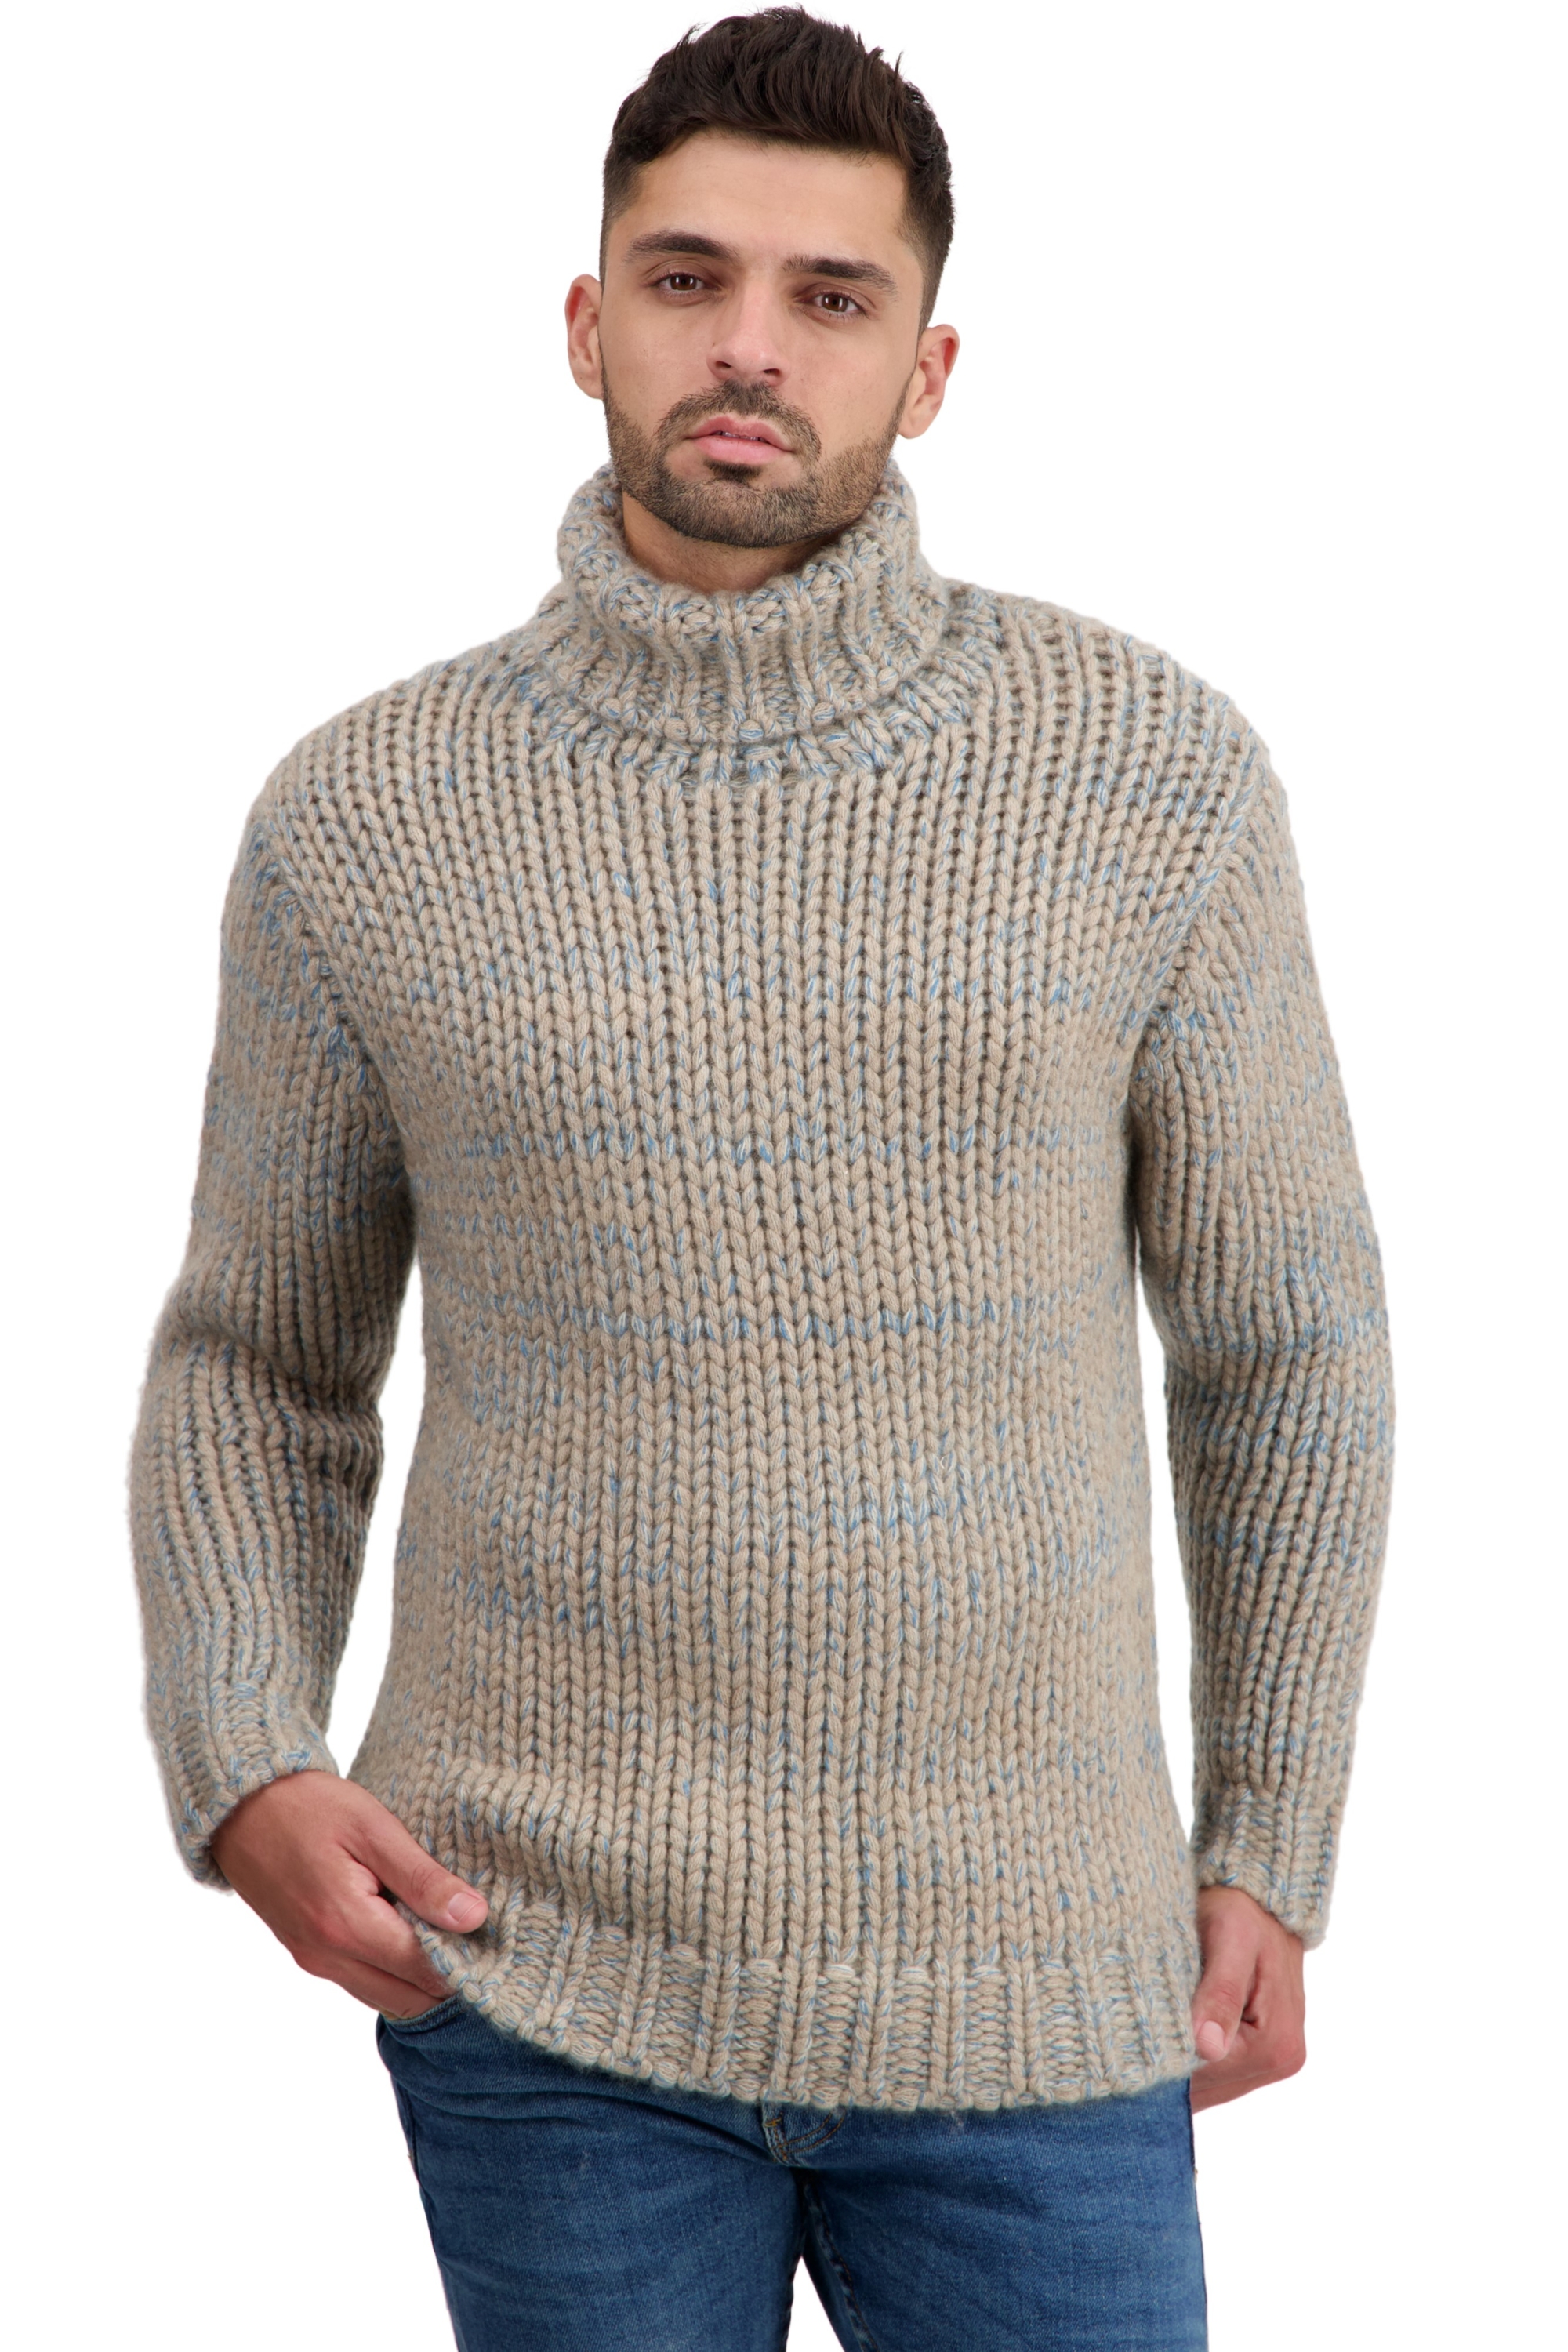 Cachemire pull homme togo natural brown manor blue natural beige 2xl